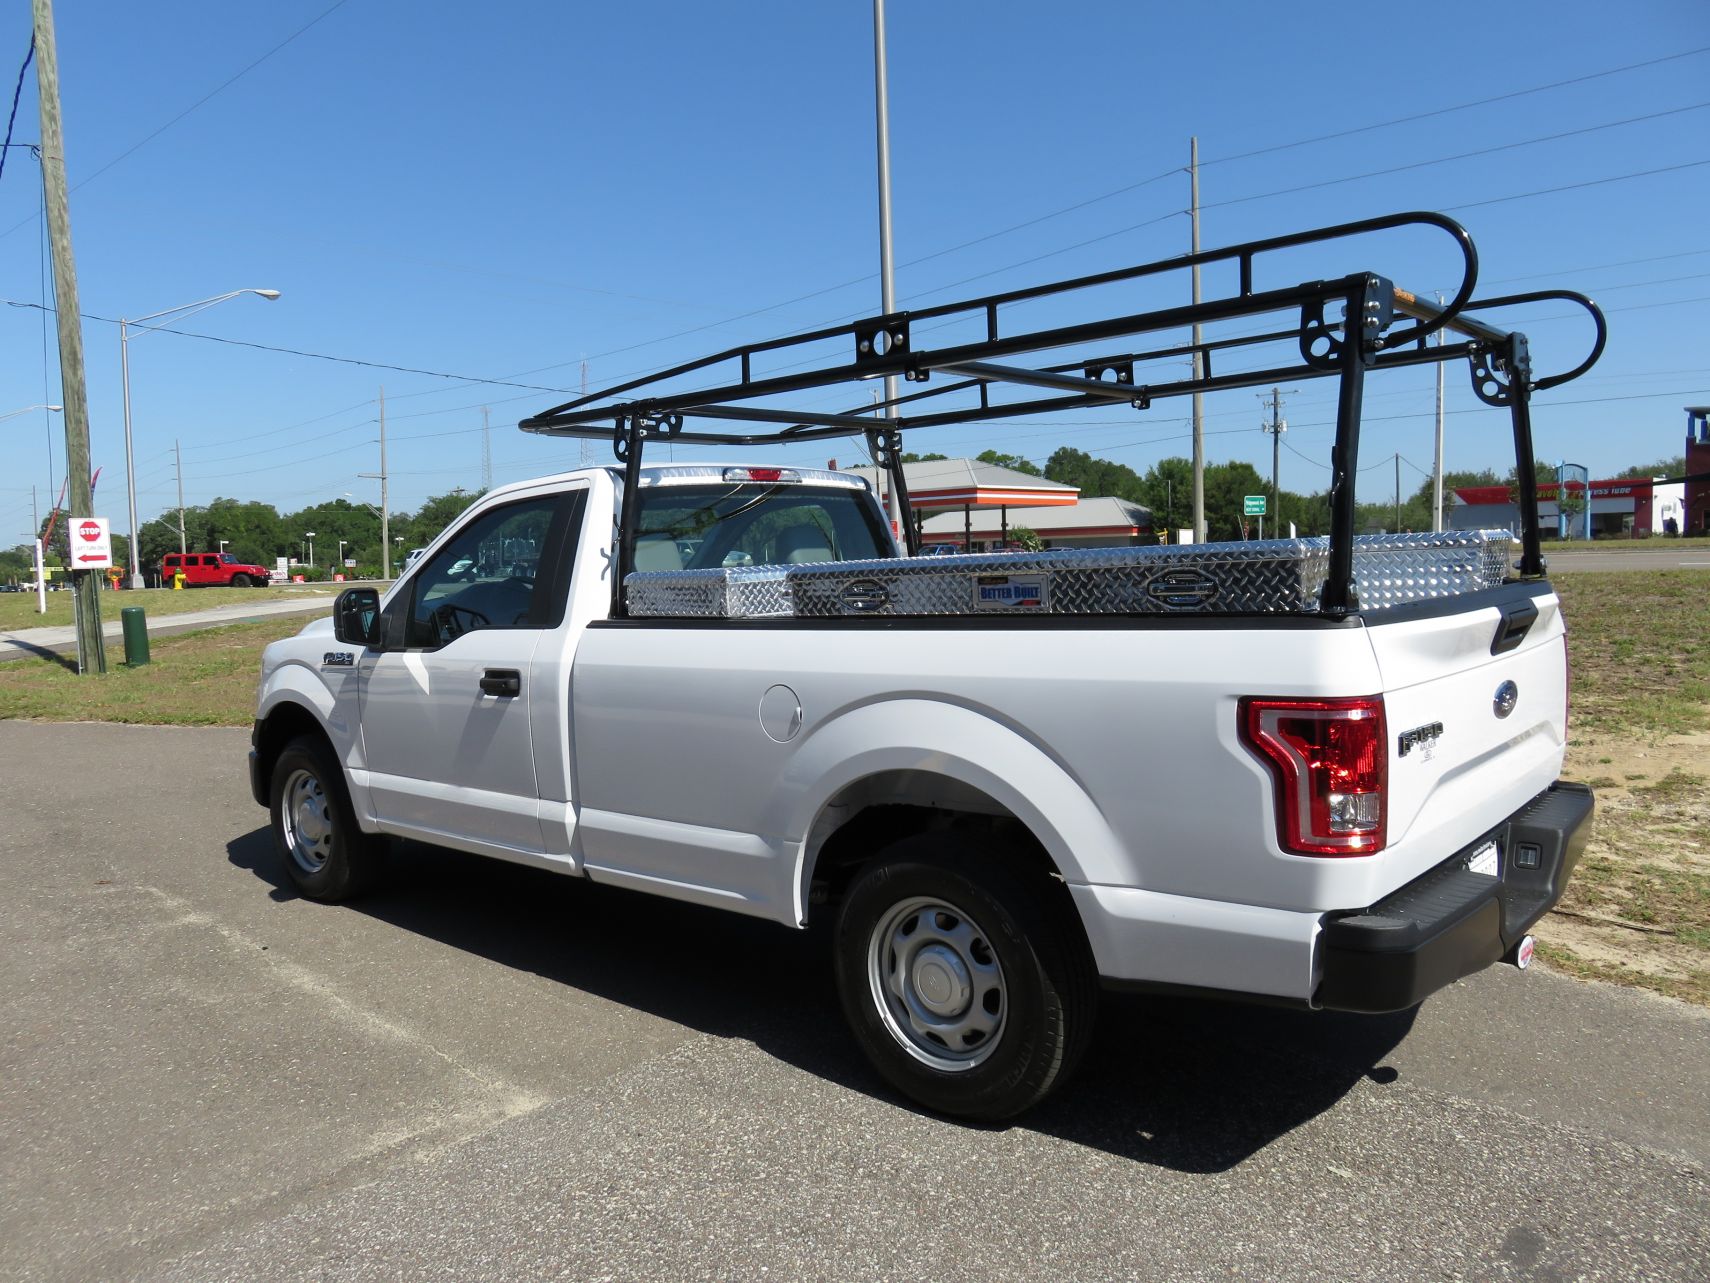 2017 Ford F150 with Commercial Ladder Rack, Aluminum Boxes, Hitch by TopperKING Brandon 813-689-2449 or Clearwater FL 727-530-9066. Call now!